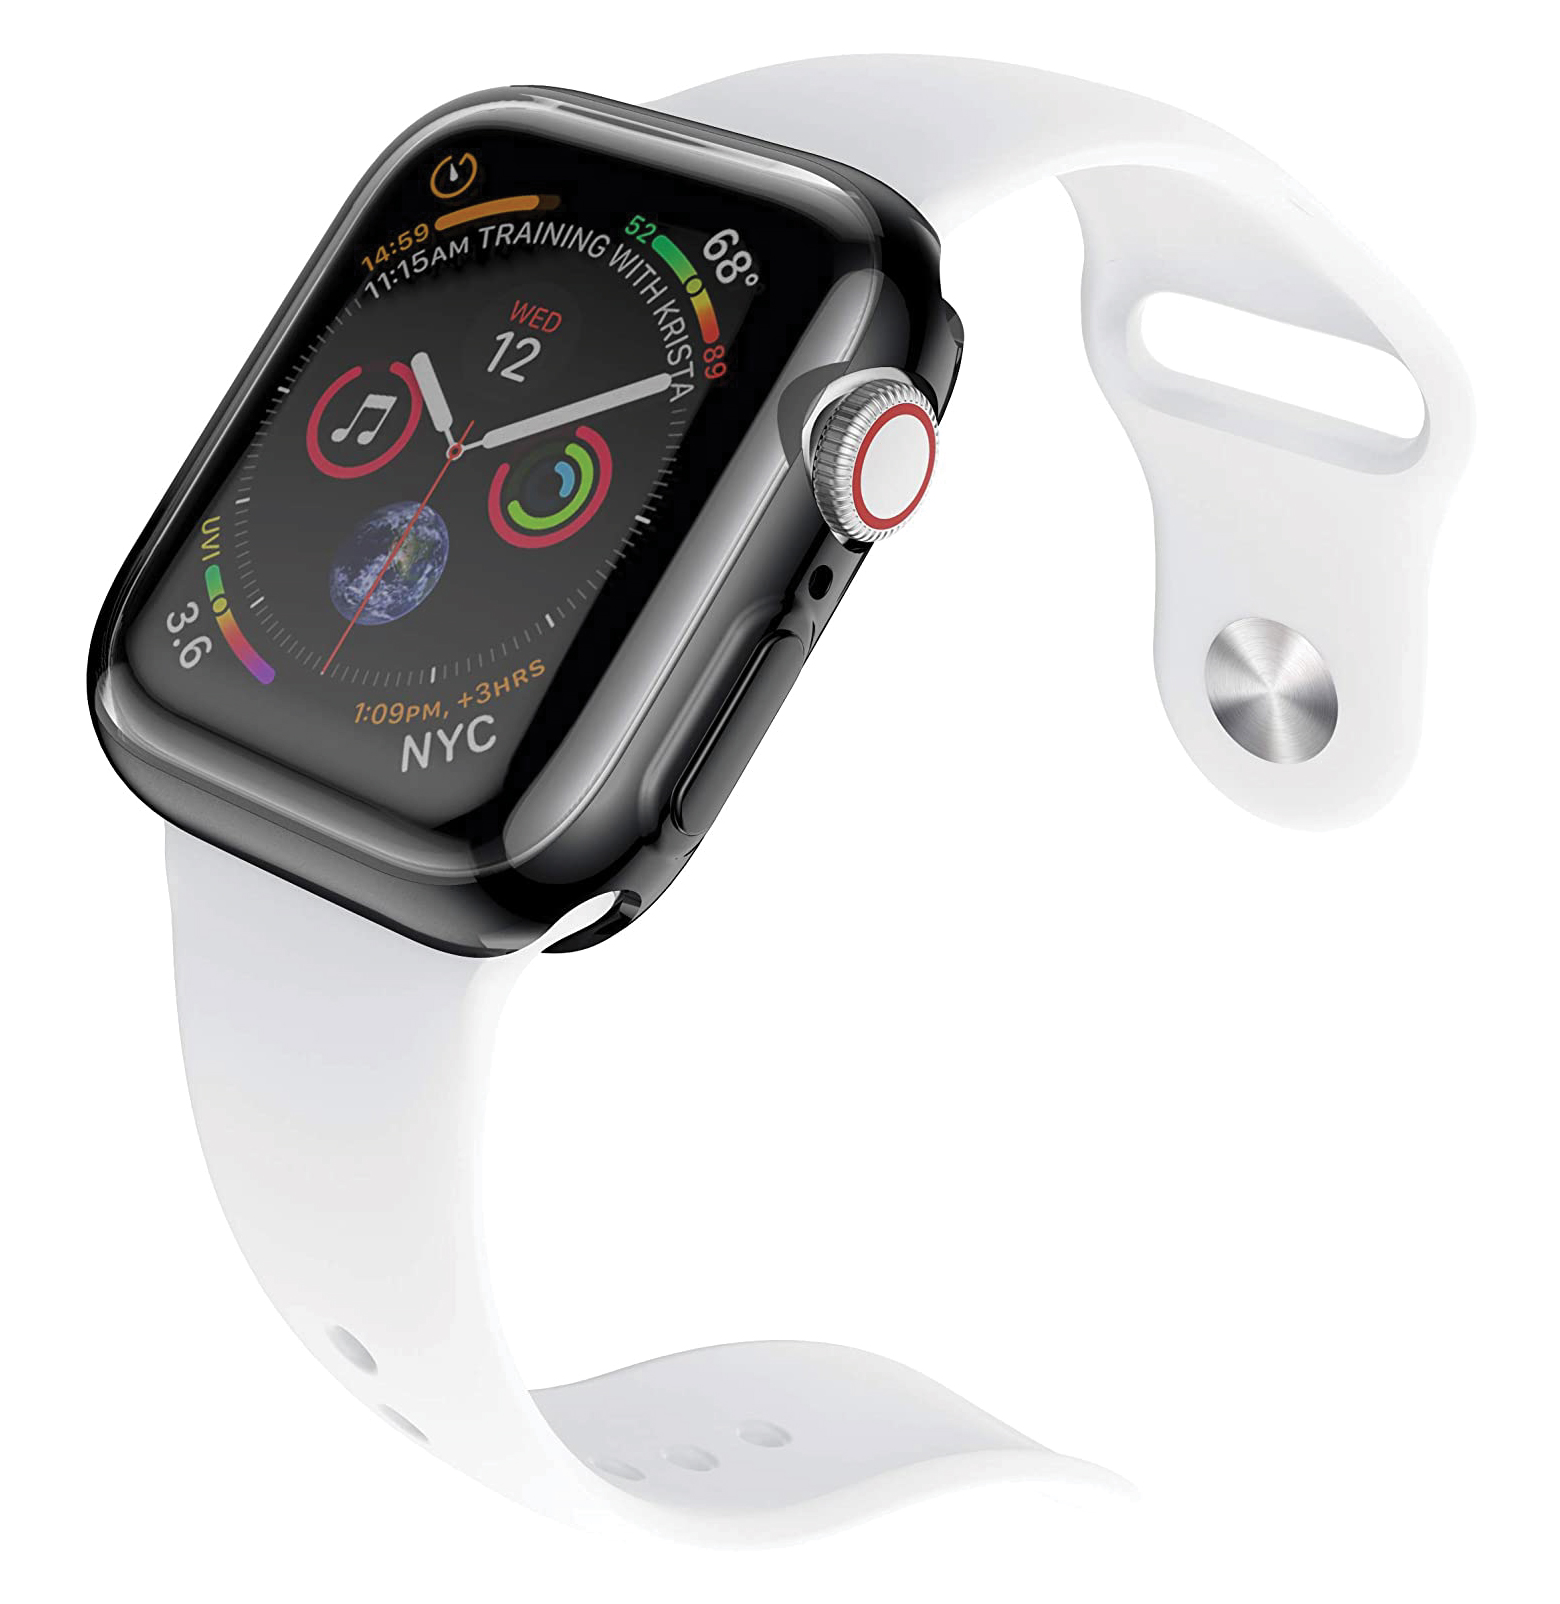 Base Bumper Tempered Glass for Apple Watch Series 1,2,3 Small (38mm)